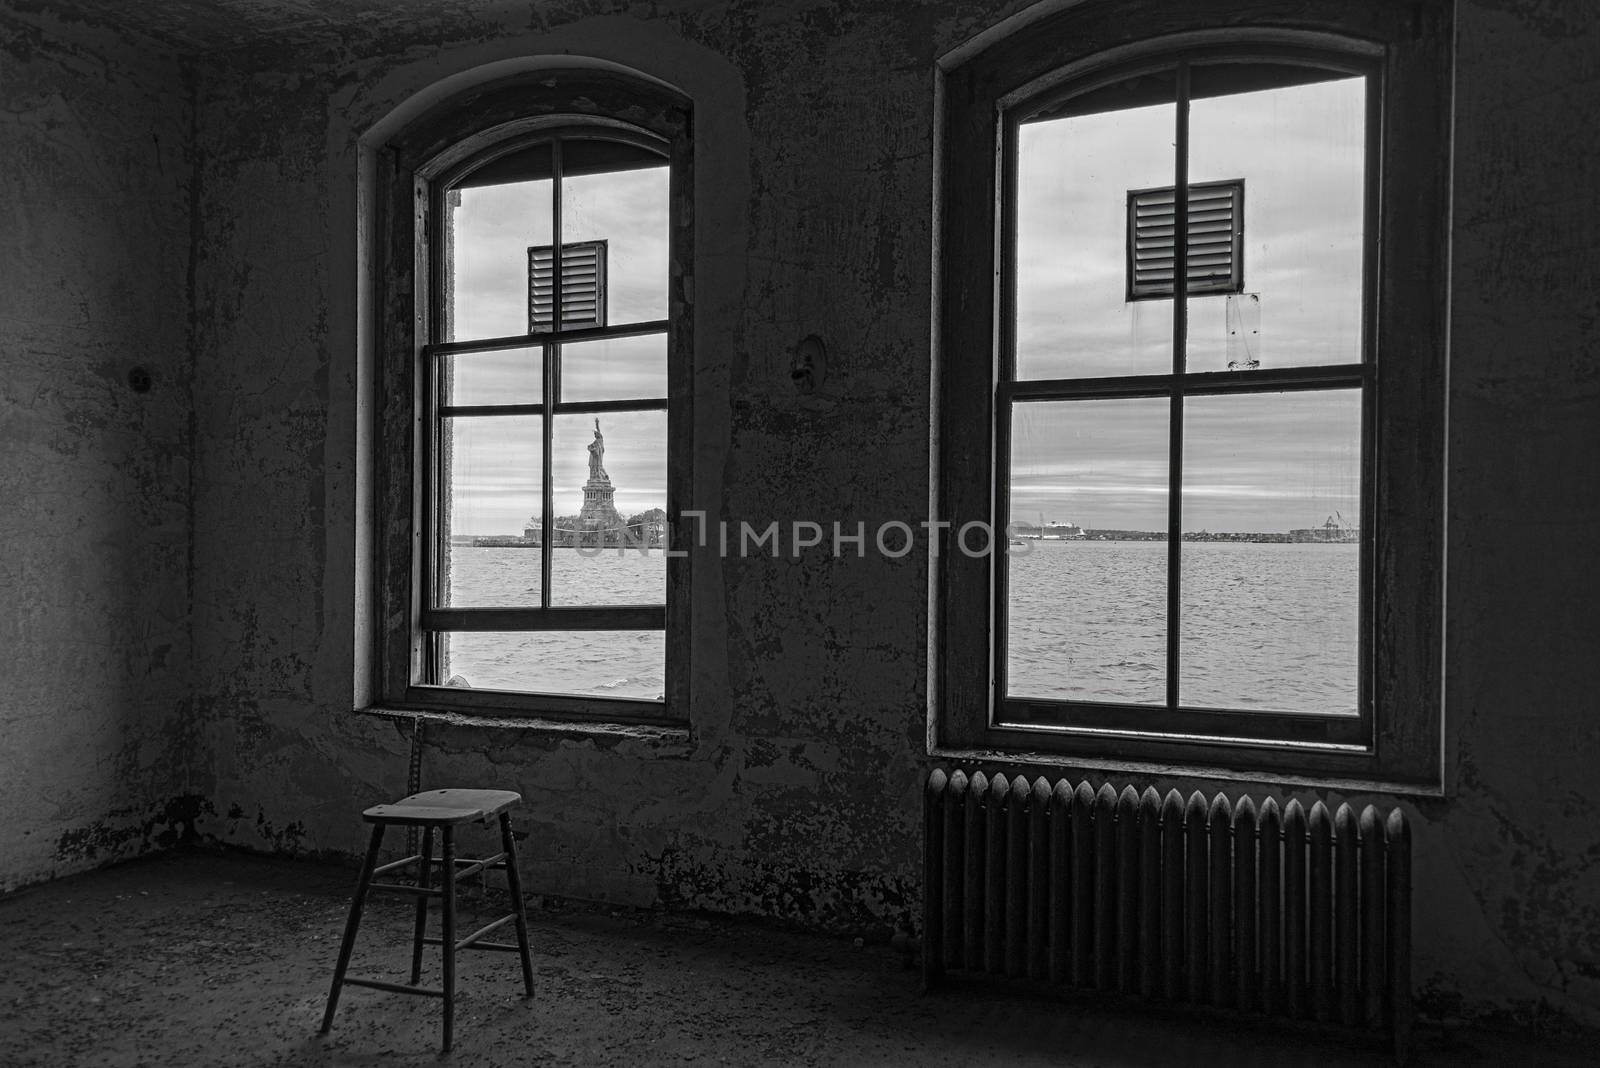 USA, New York, Ellis Island - May 2019: View of the Statue of Liberty through the window of the Contagious Diseases ward at Ellis Island Hospital